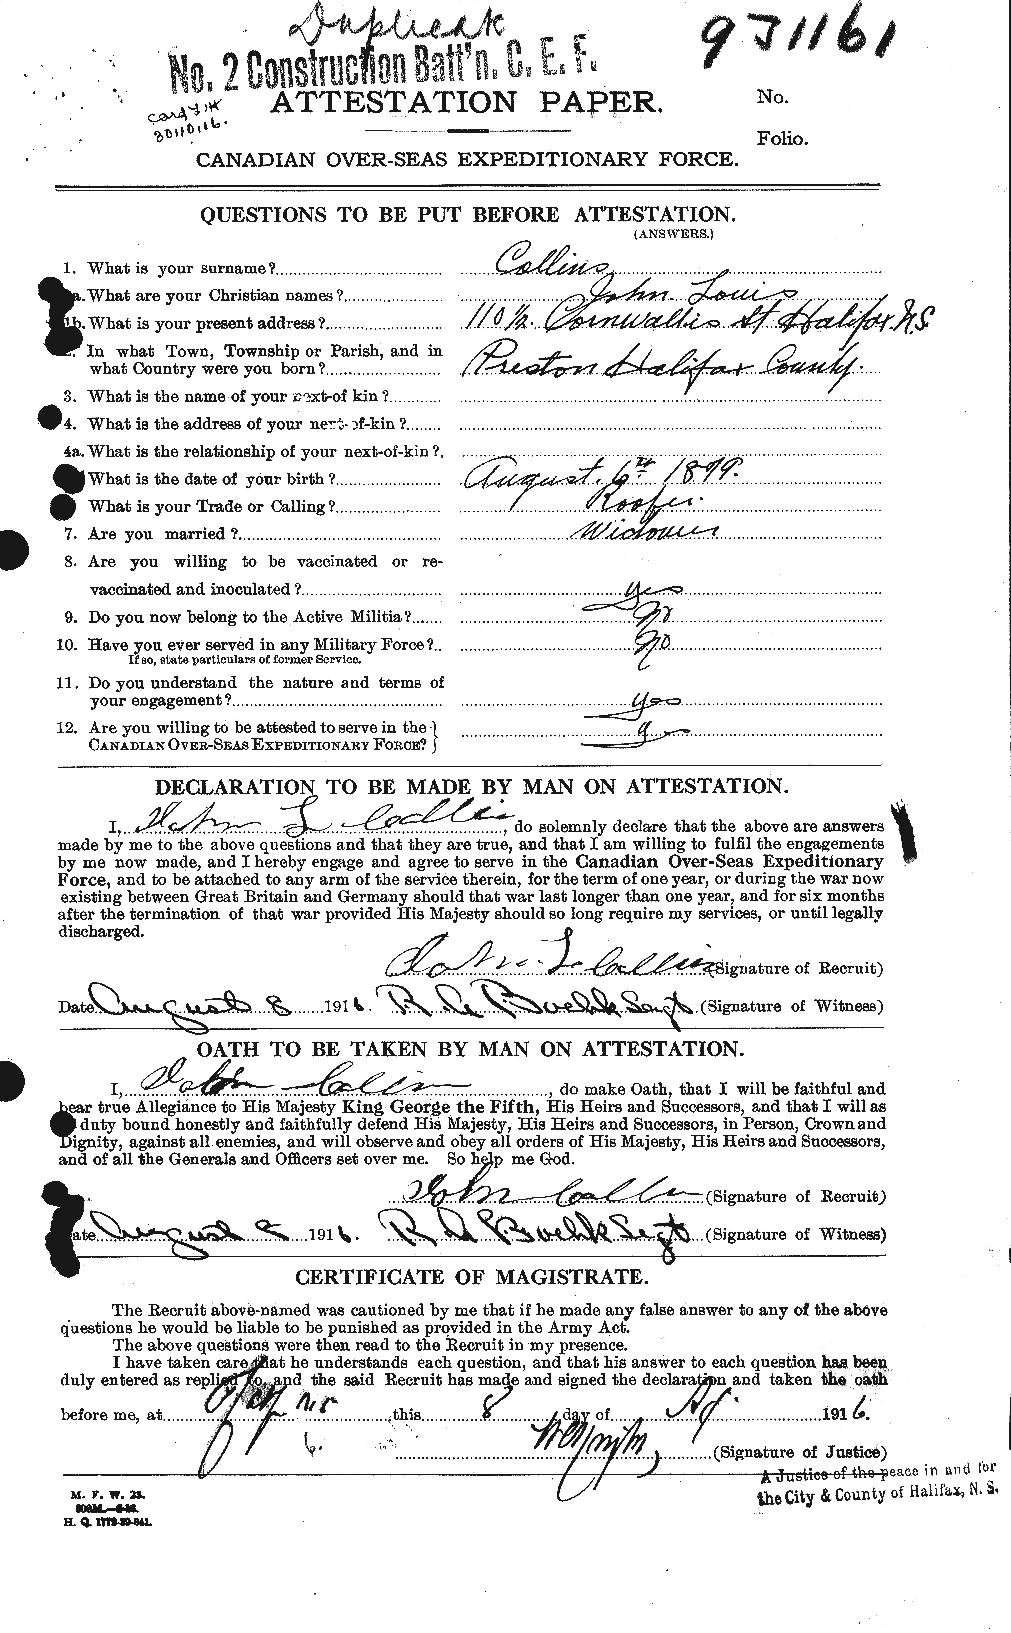 Personnel Records of the First World War - CEF 069544a